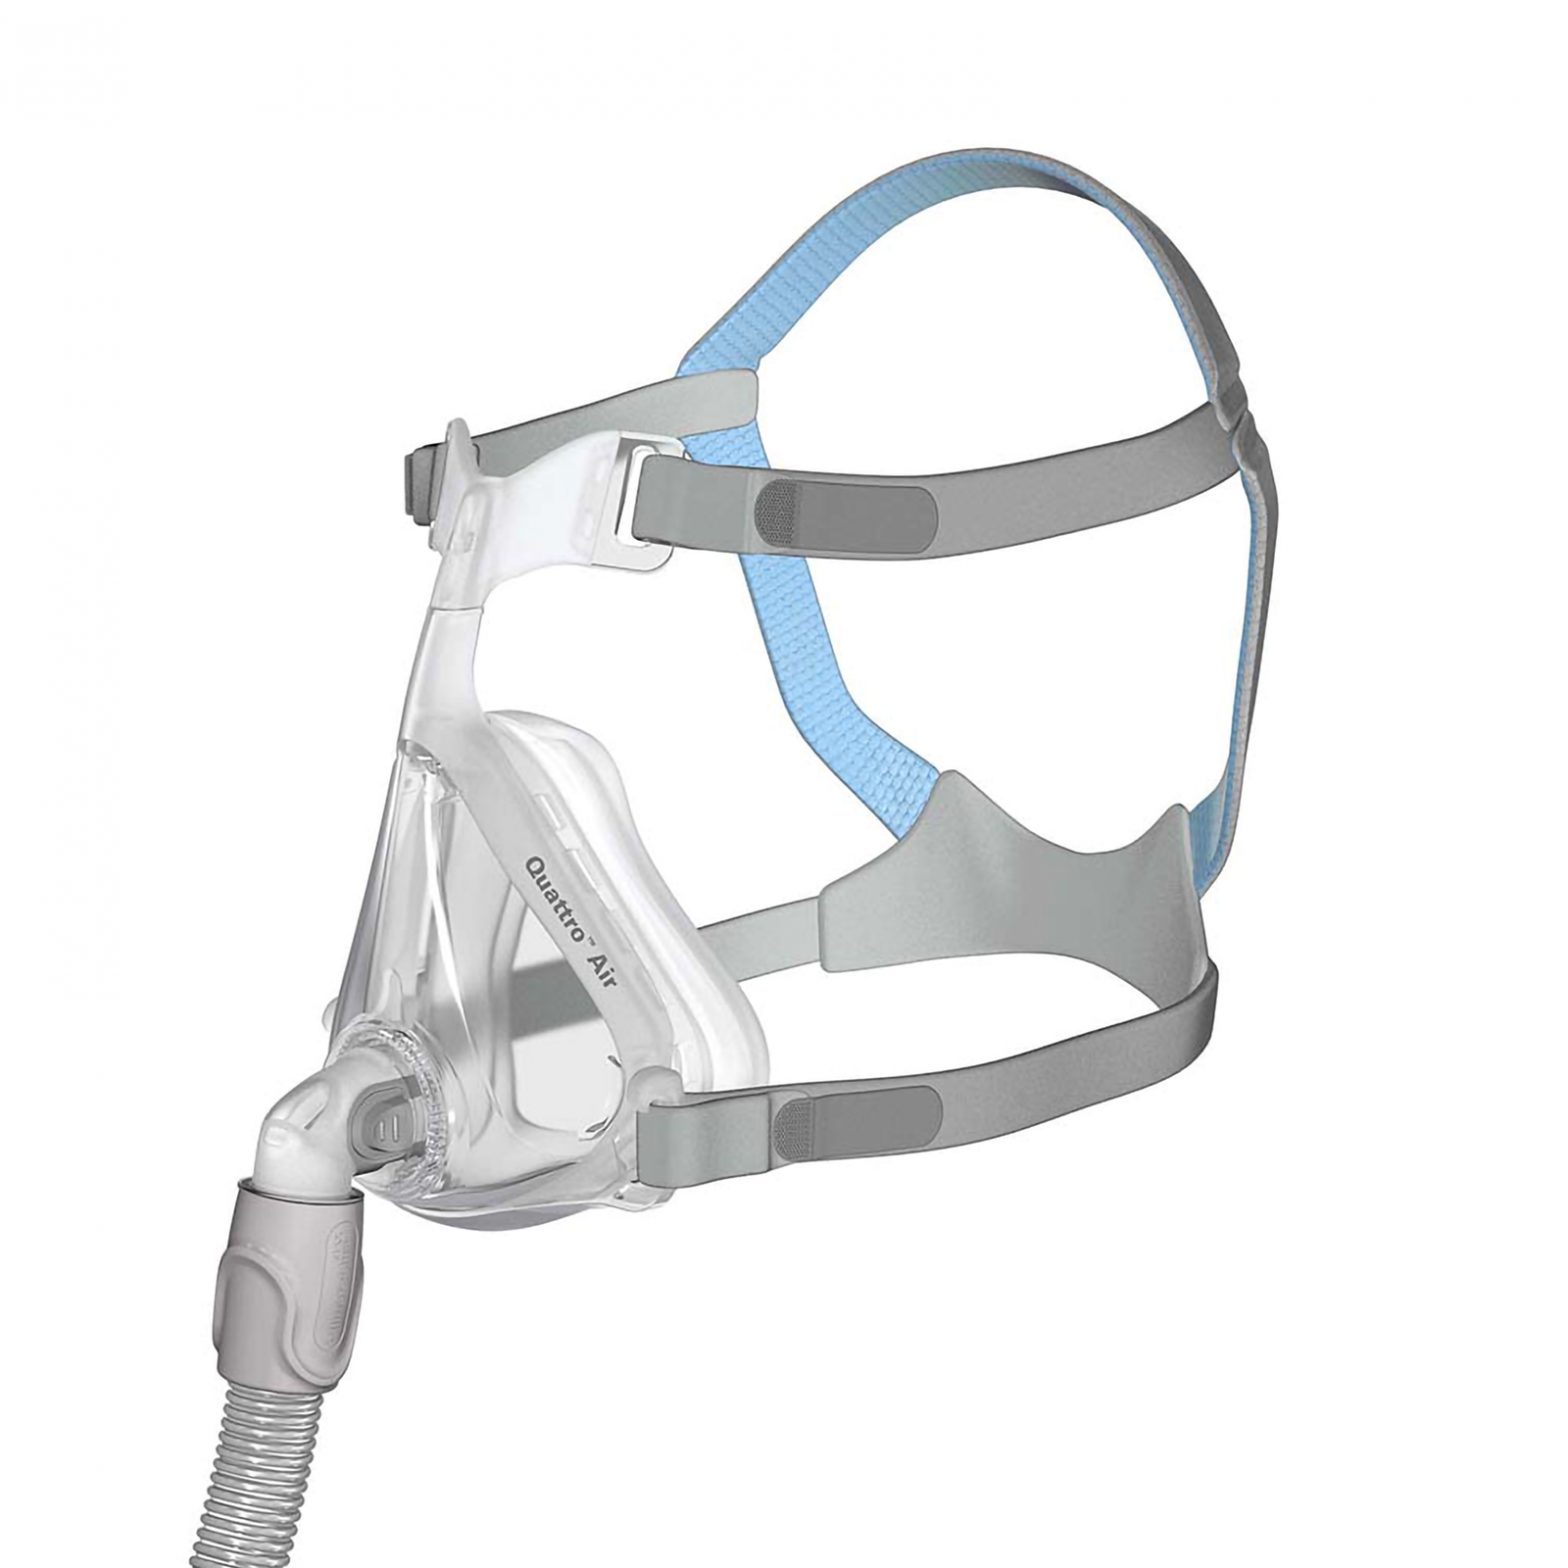 Quattro Air Full Face CPAP Mask Fitting Guide